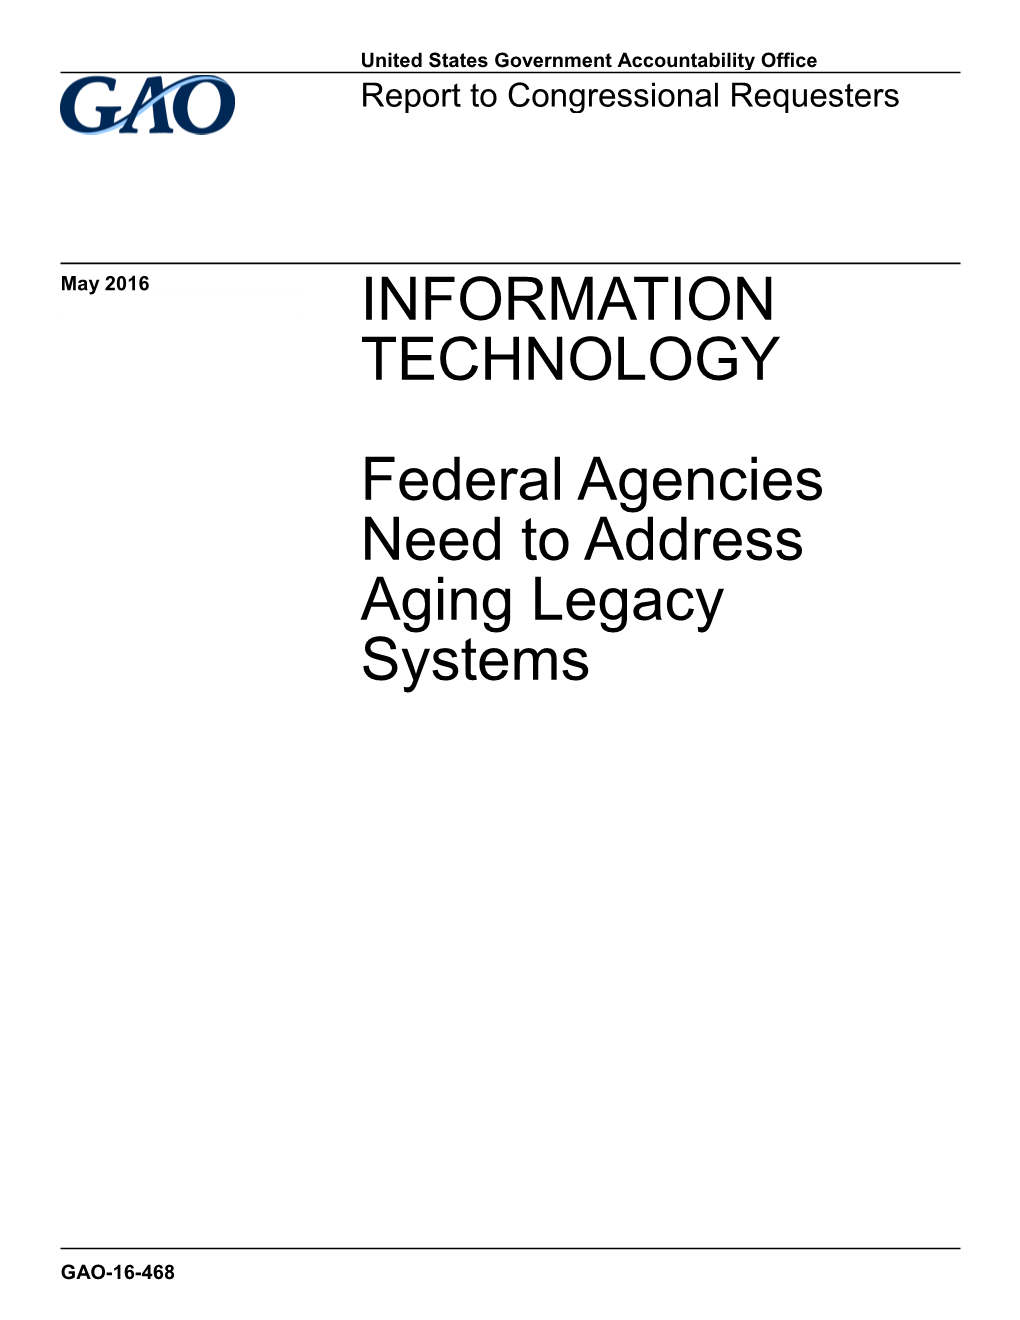 Federal Agencies Need to Address Aging Legacy Systems